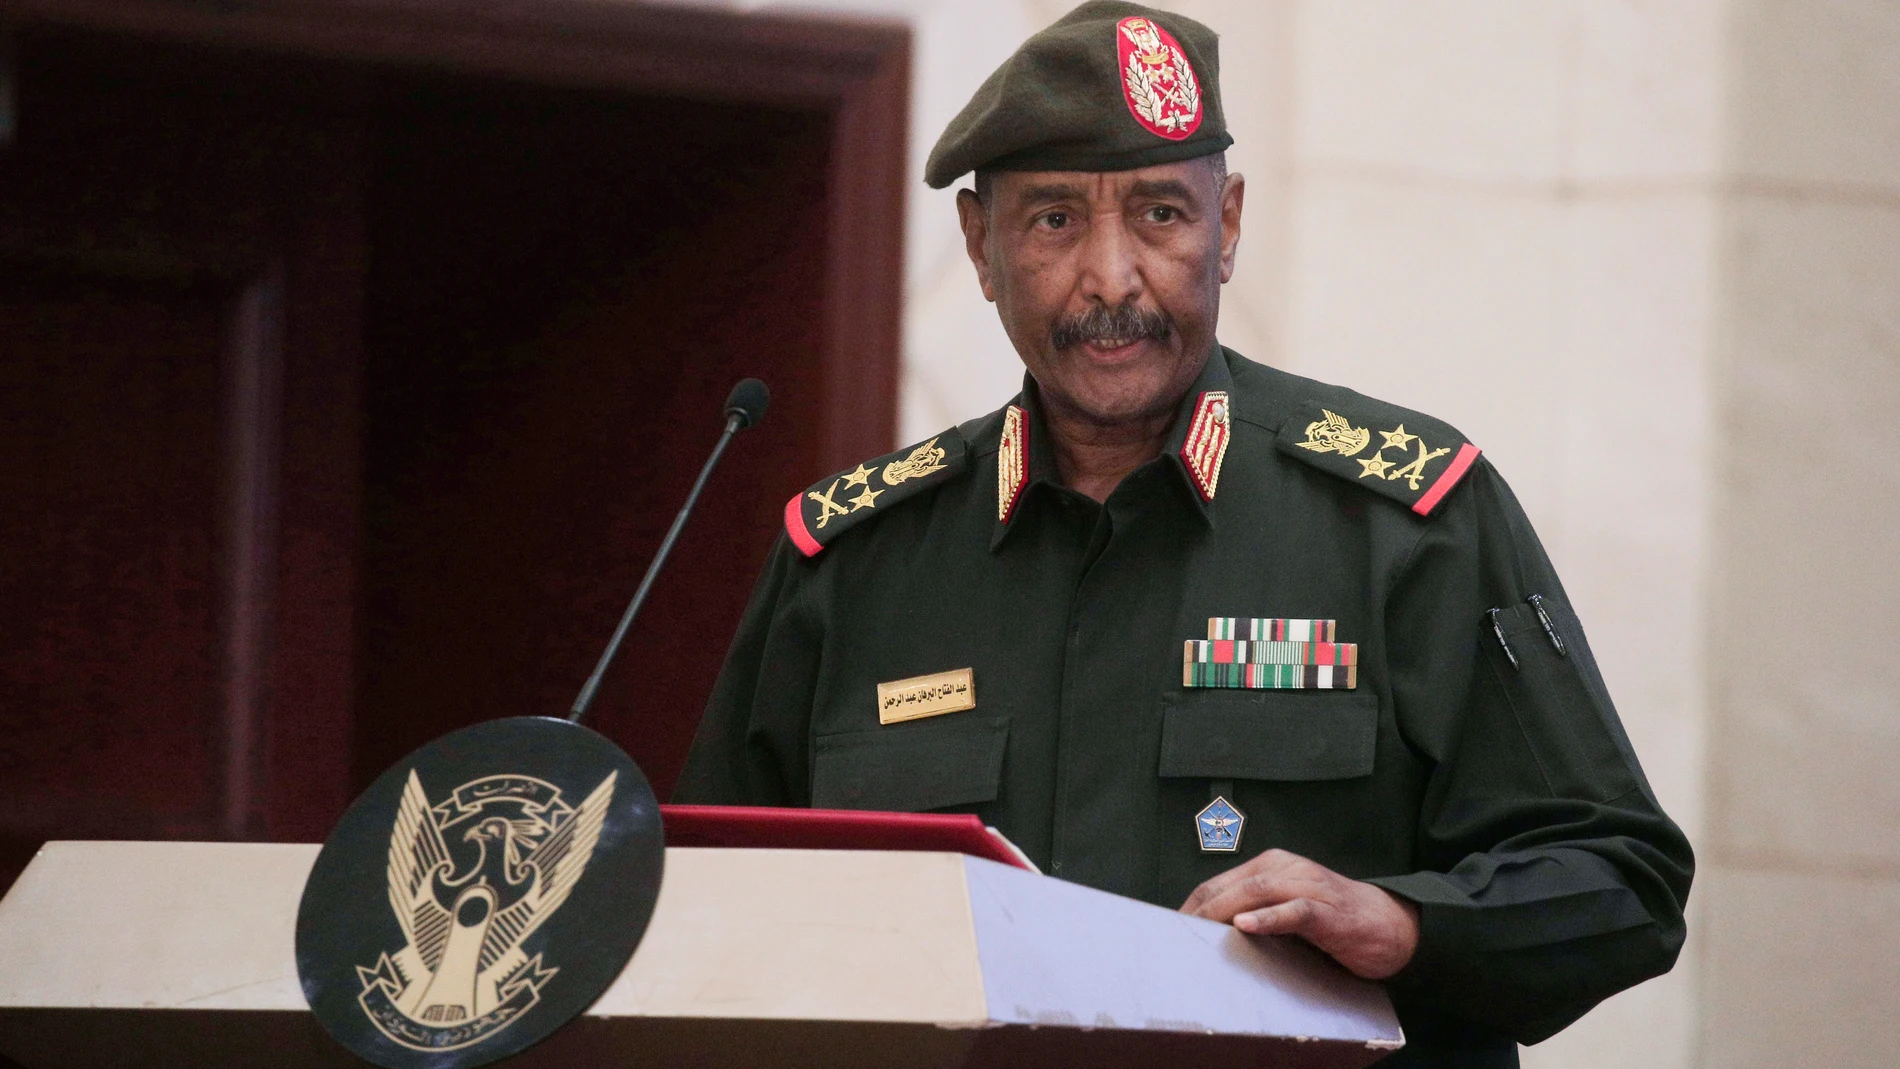 FILE - Sudan's Army chief Gen. Abdel-Fattah Burhan speaks following the signature of an initial deal aimed at ending a deep crisis caused by last year's military coup, in Khartoum, Sudan, Dec. 5, 2022. Burhan, Sudan’s top army general has fired the country's paramilitary leader, on Friday, May 19, 2023. (AP Photo/Marwan Ali, File)